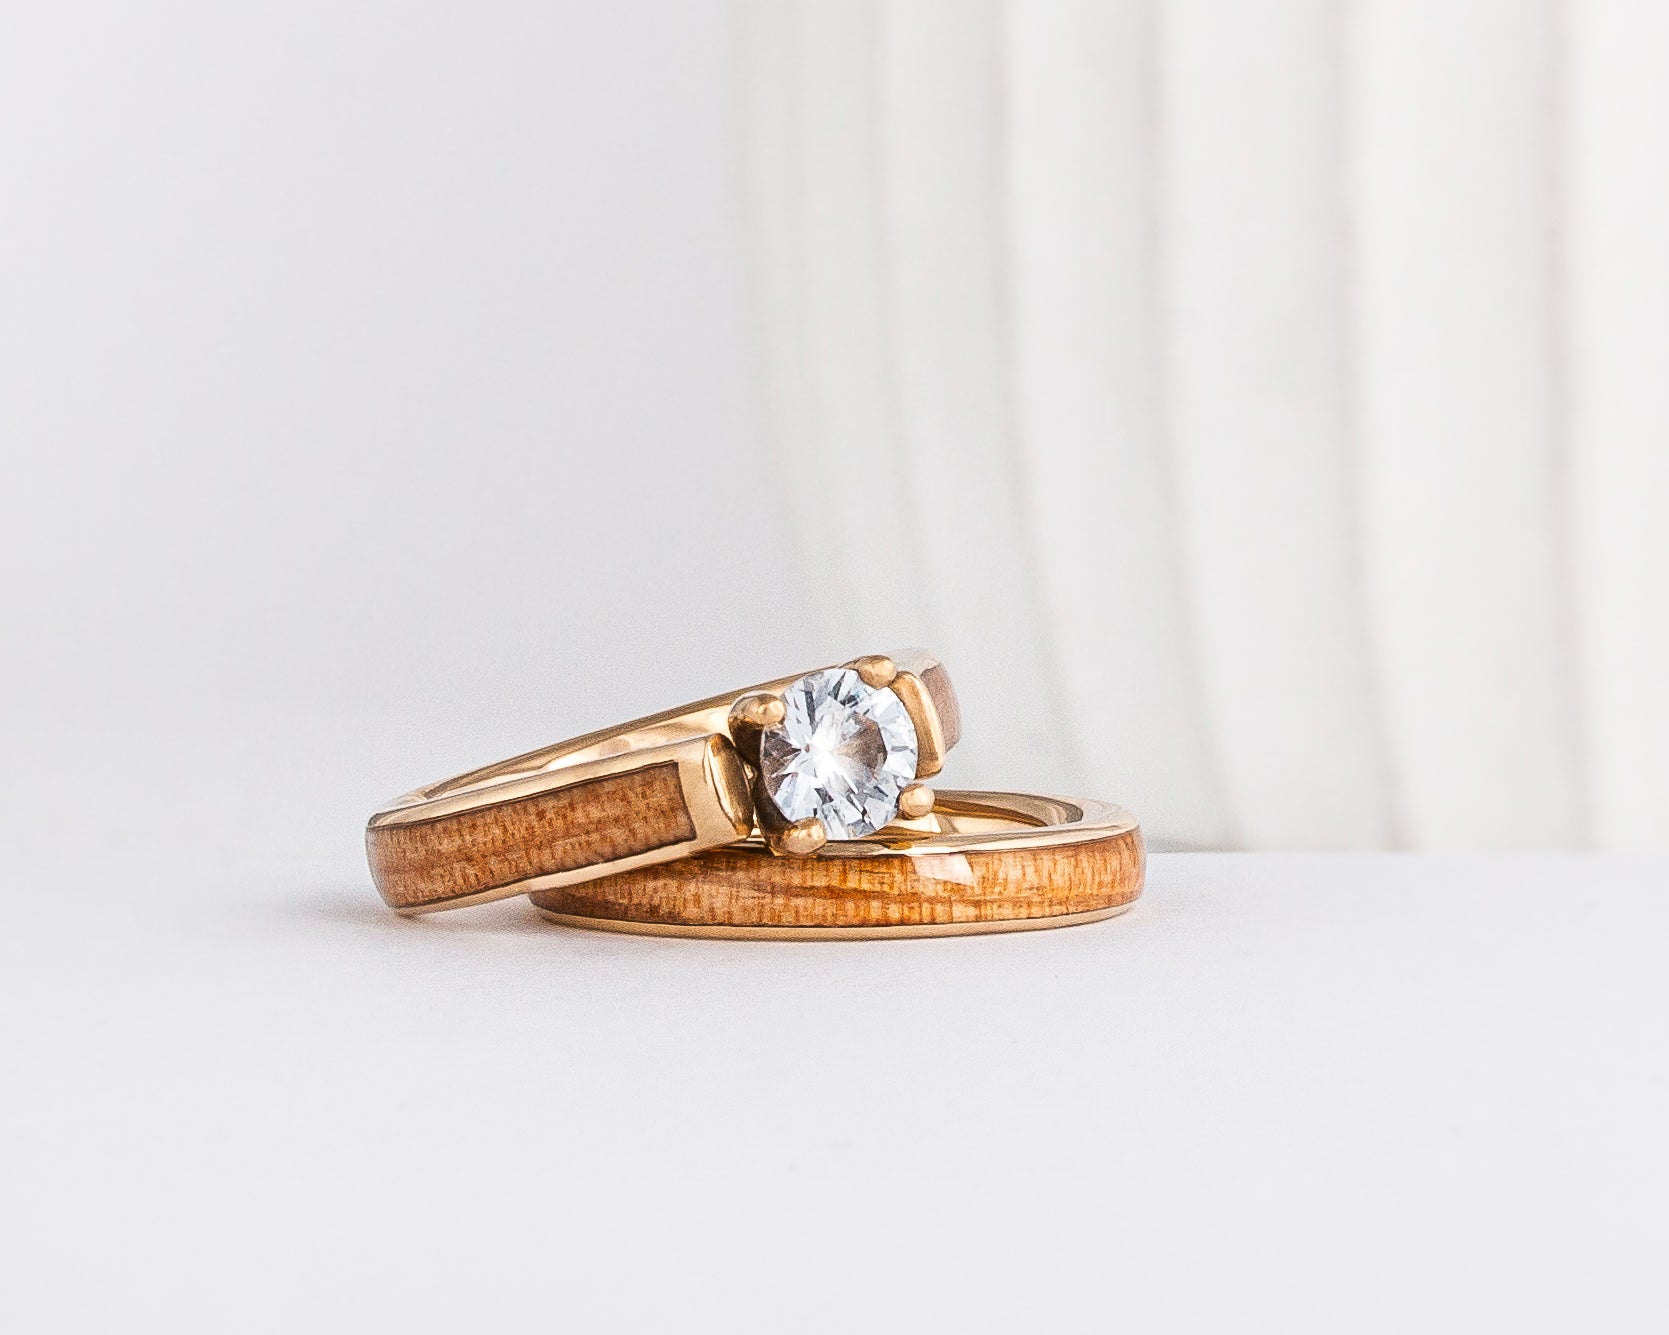 a set of yellow gold and wood inlay rings is shown with american elm wood inlays